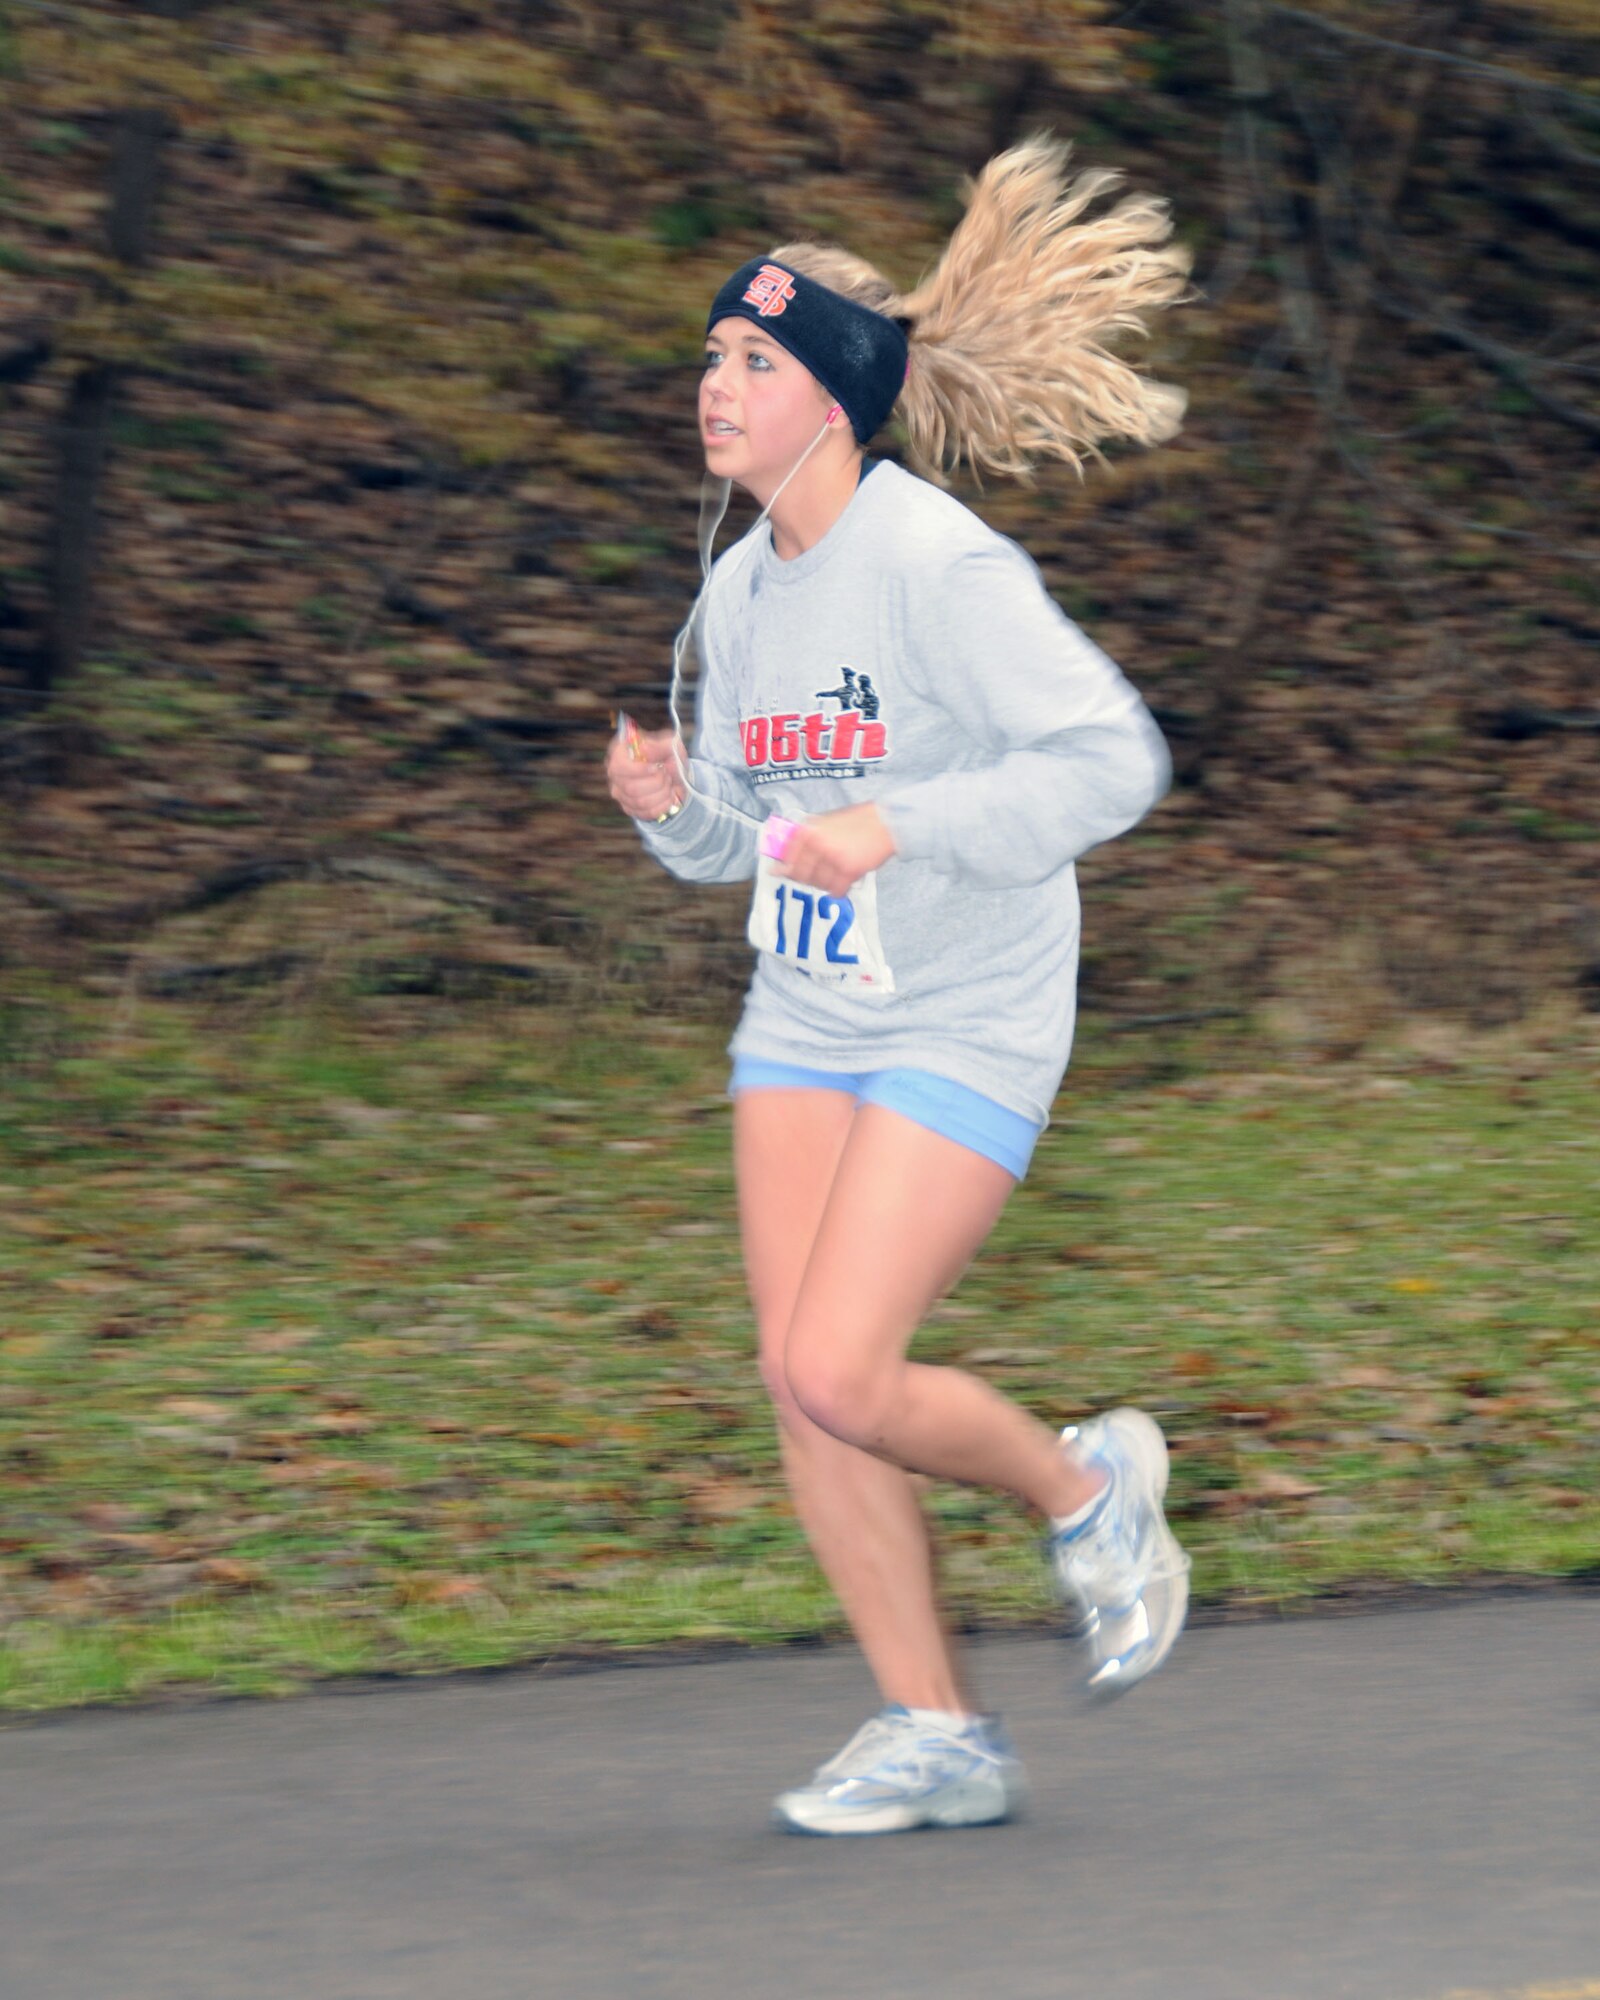 Senior Airman Melissa Knight, an Intel Specialist at the 185th Air Refueling Wing, Sioux City, Iowa, runs through Stone Park during the Siouxland Lewis and Clark Marathon.  Knight finished first in her division (females 20-24) with a time of 3 hours 36 minutes and 50 seconds.